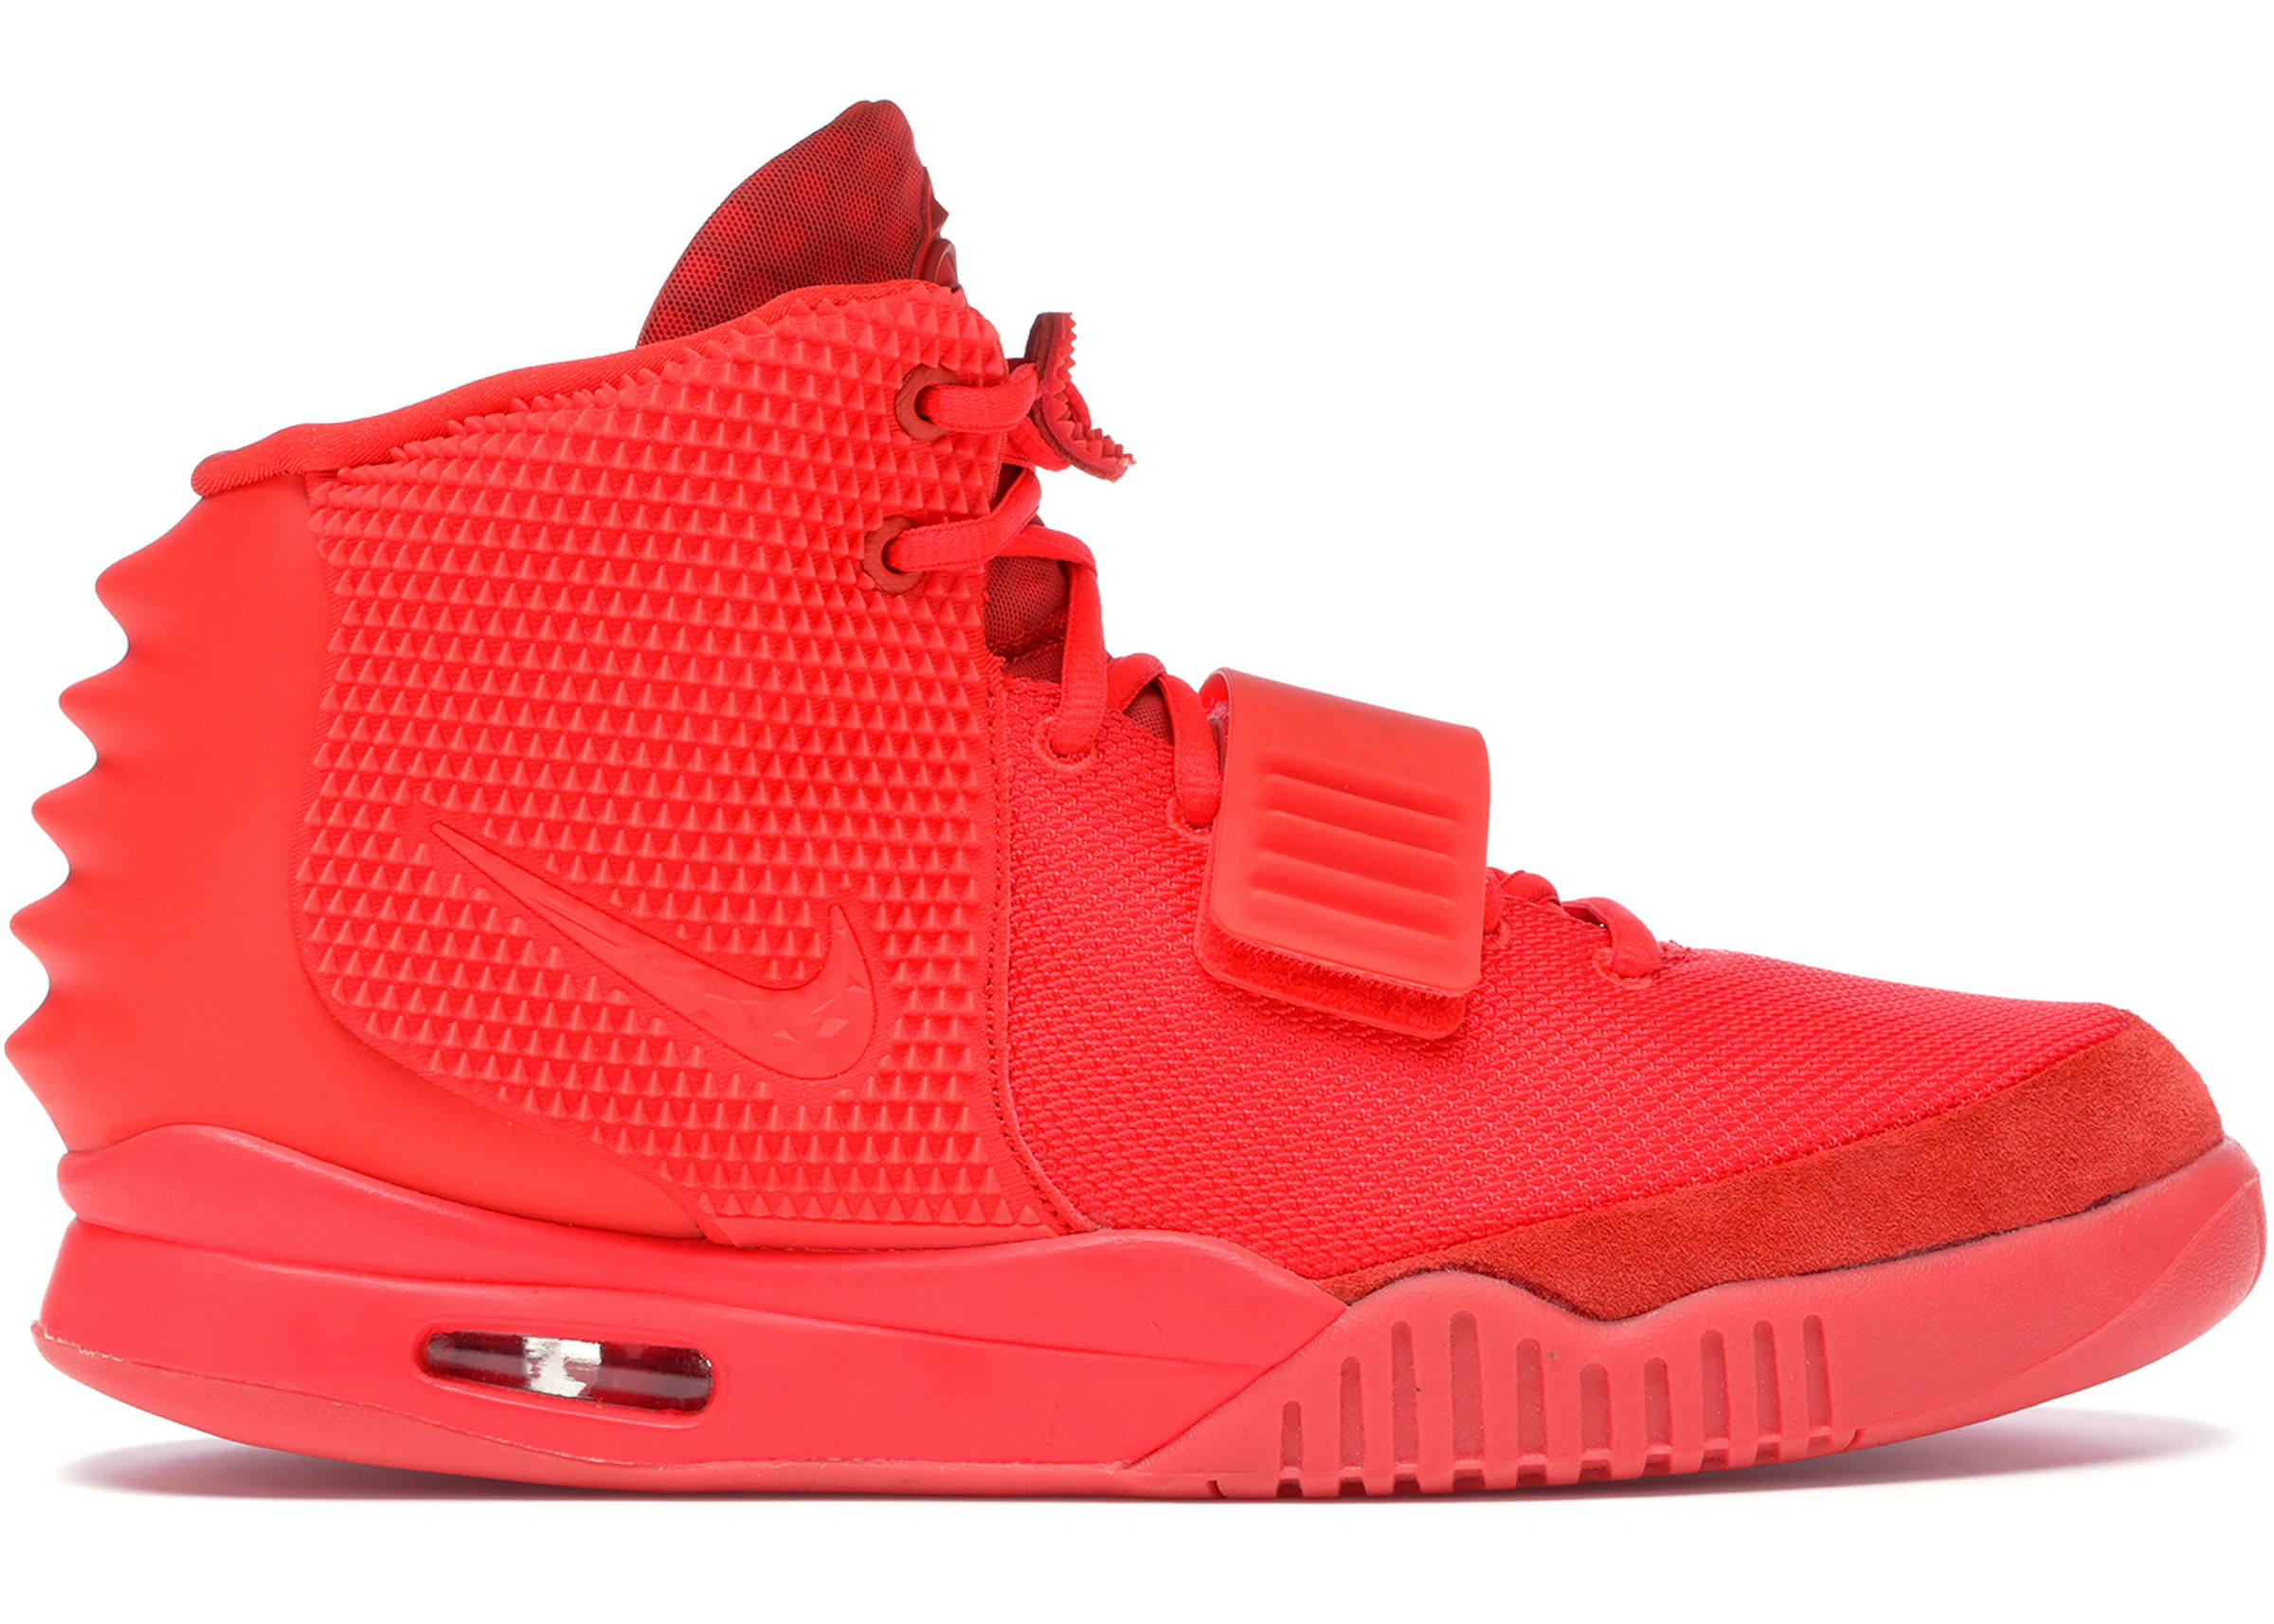 Nike Air Yeezy 2 Red October - 508214-660